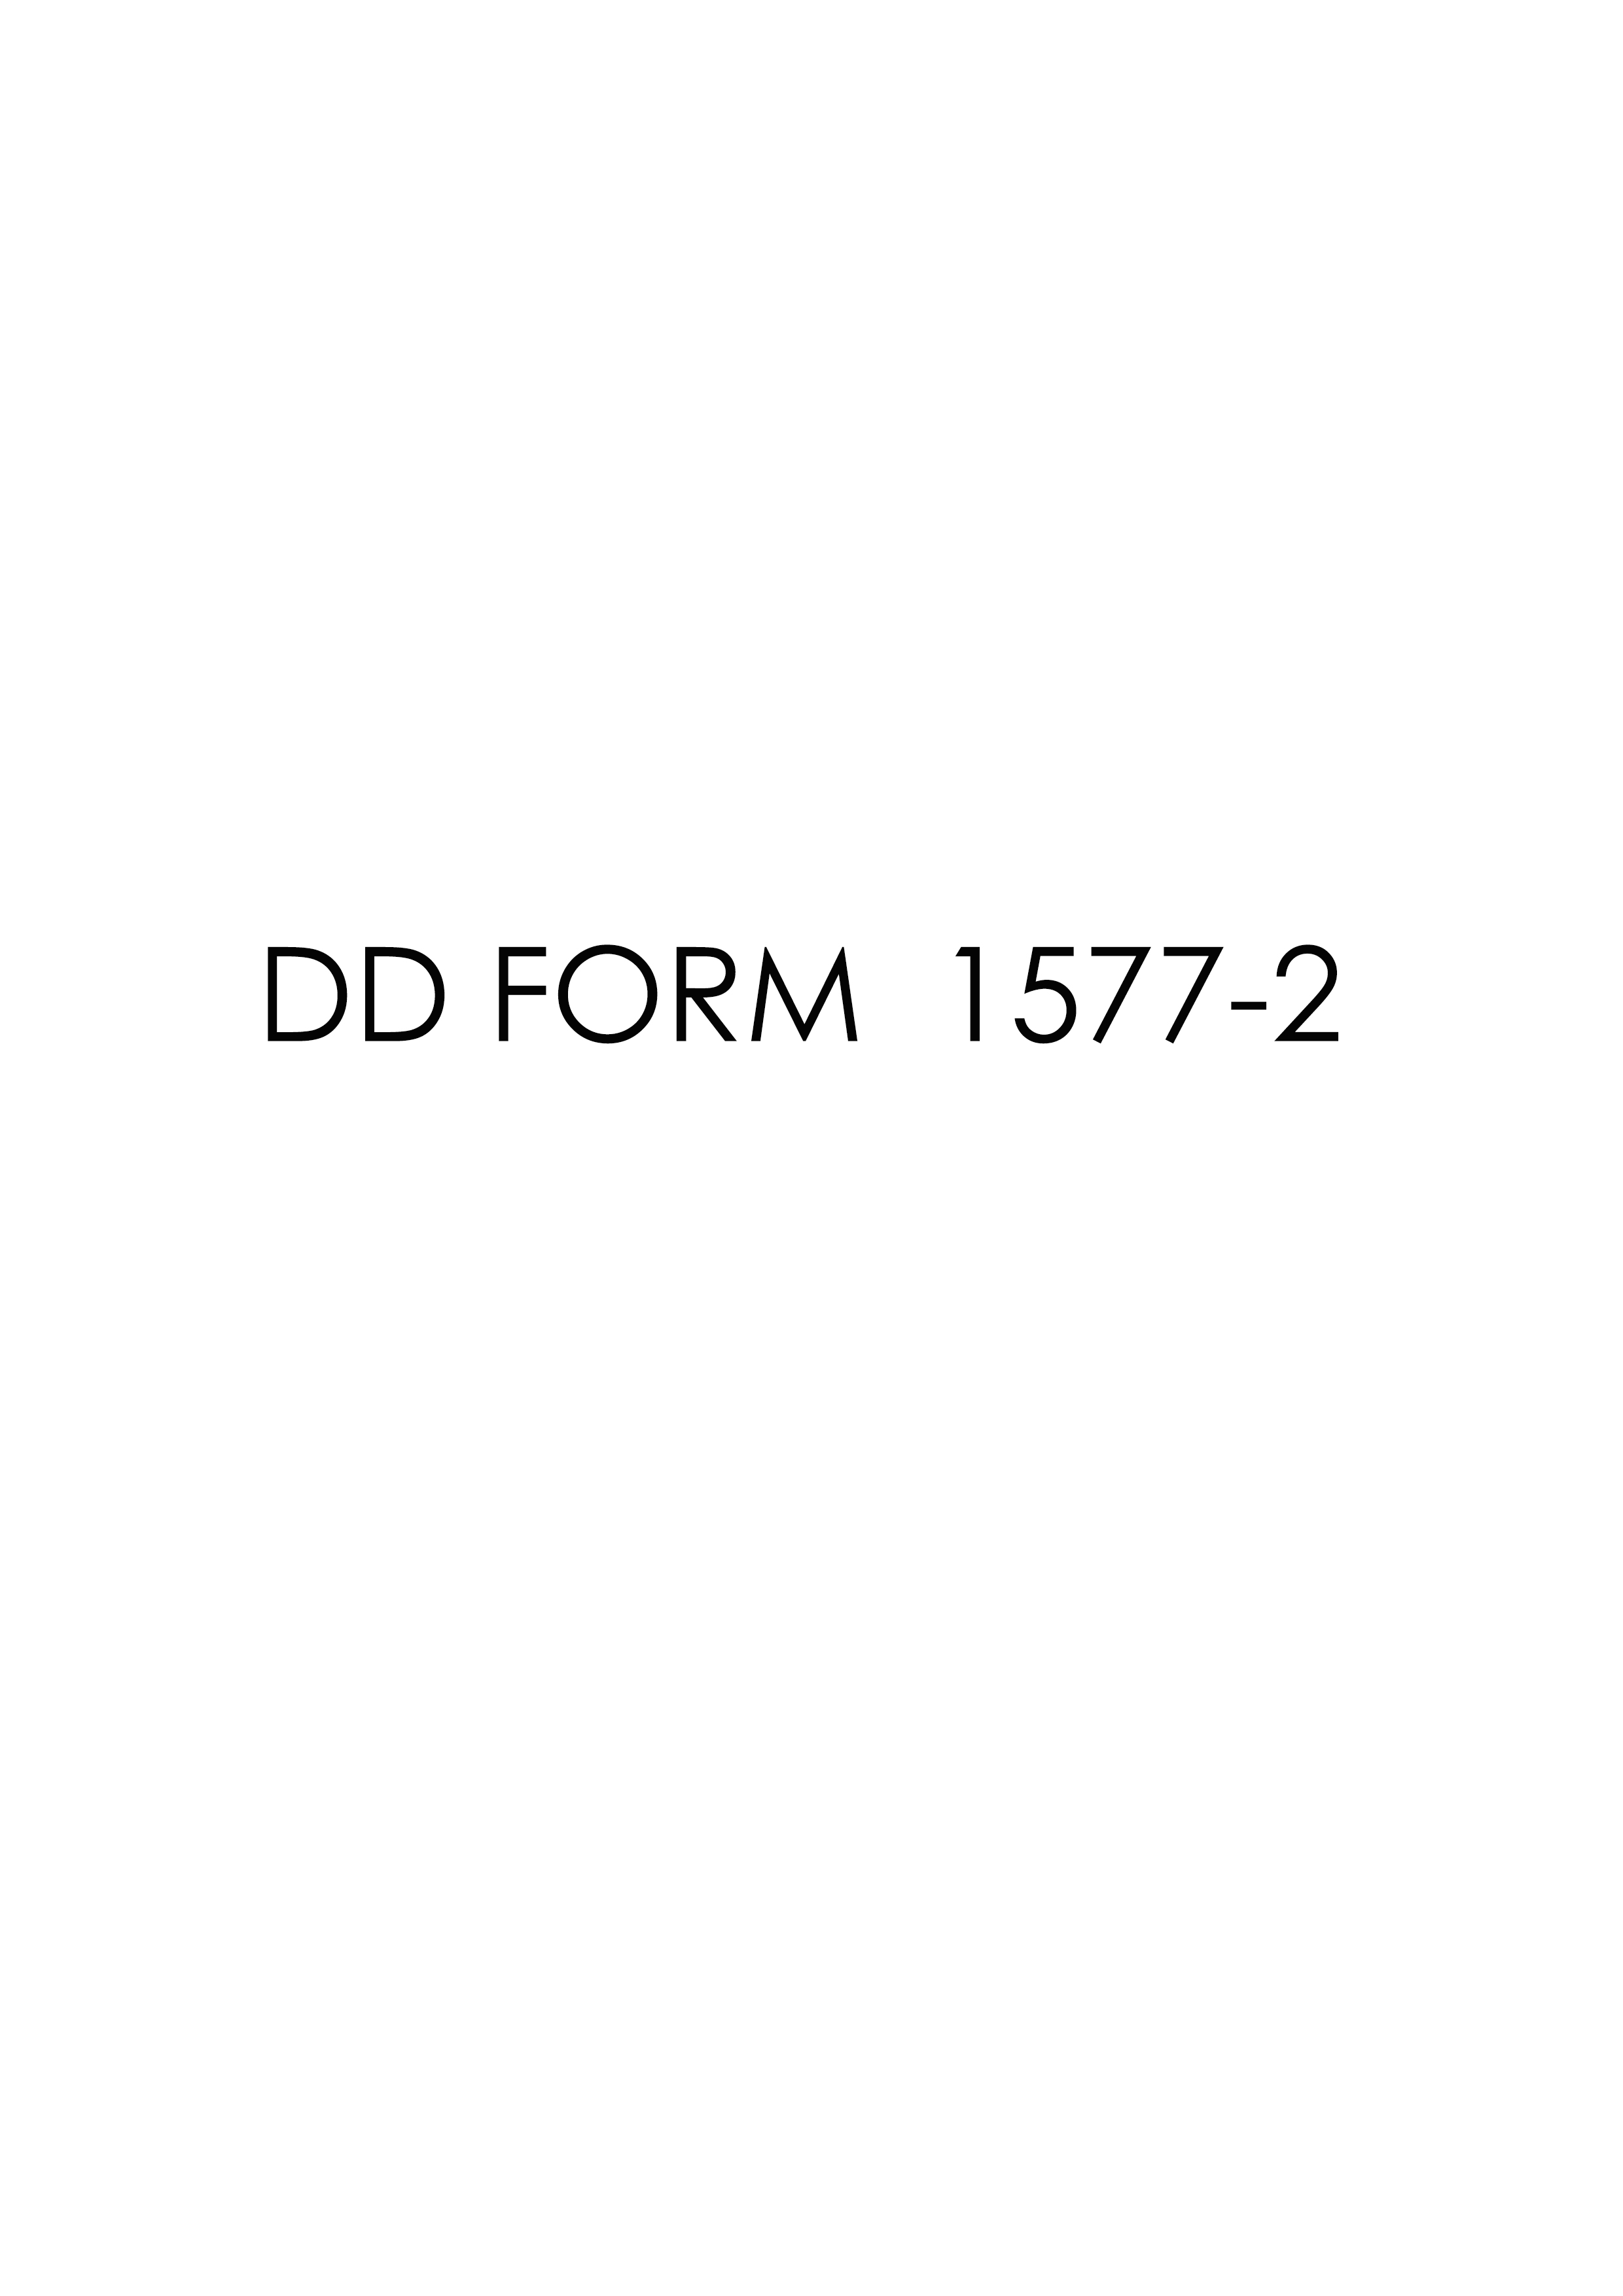 Download Fillable dd Form 1577-2